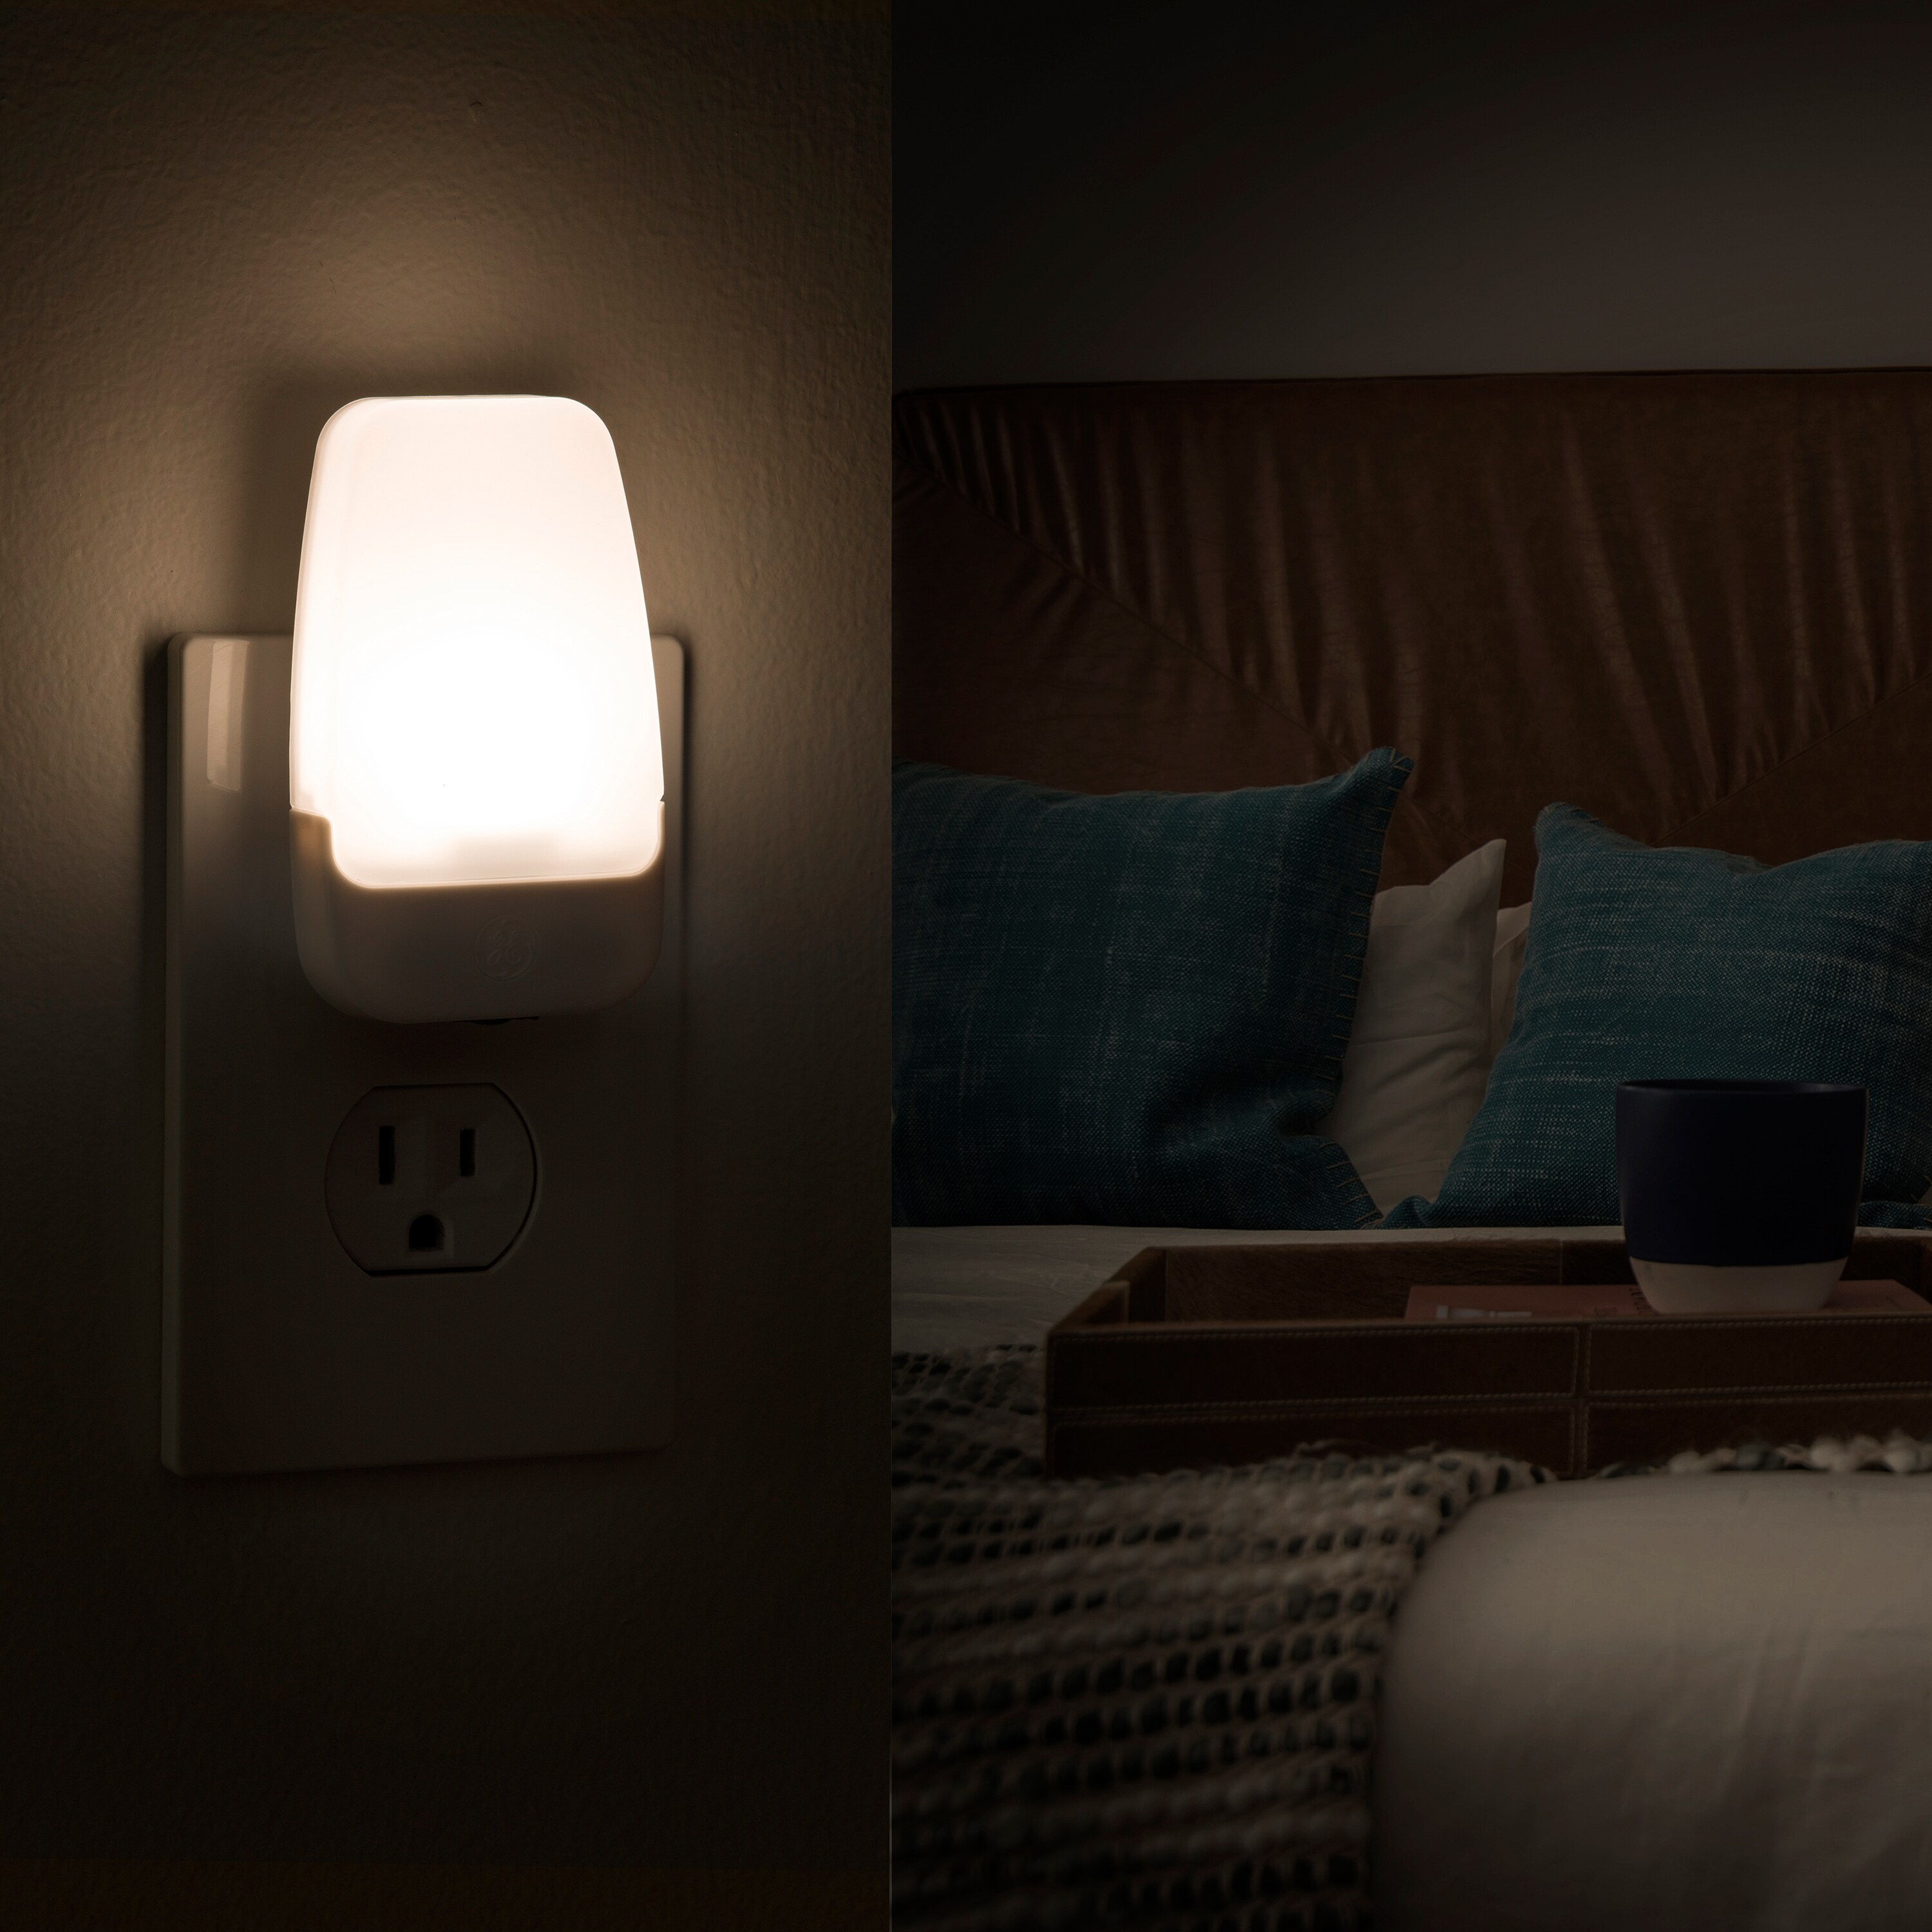 LED Night Light 2 Pack Night Lights Plug in Walls with Dusk to Dawn Sleep Safe 